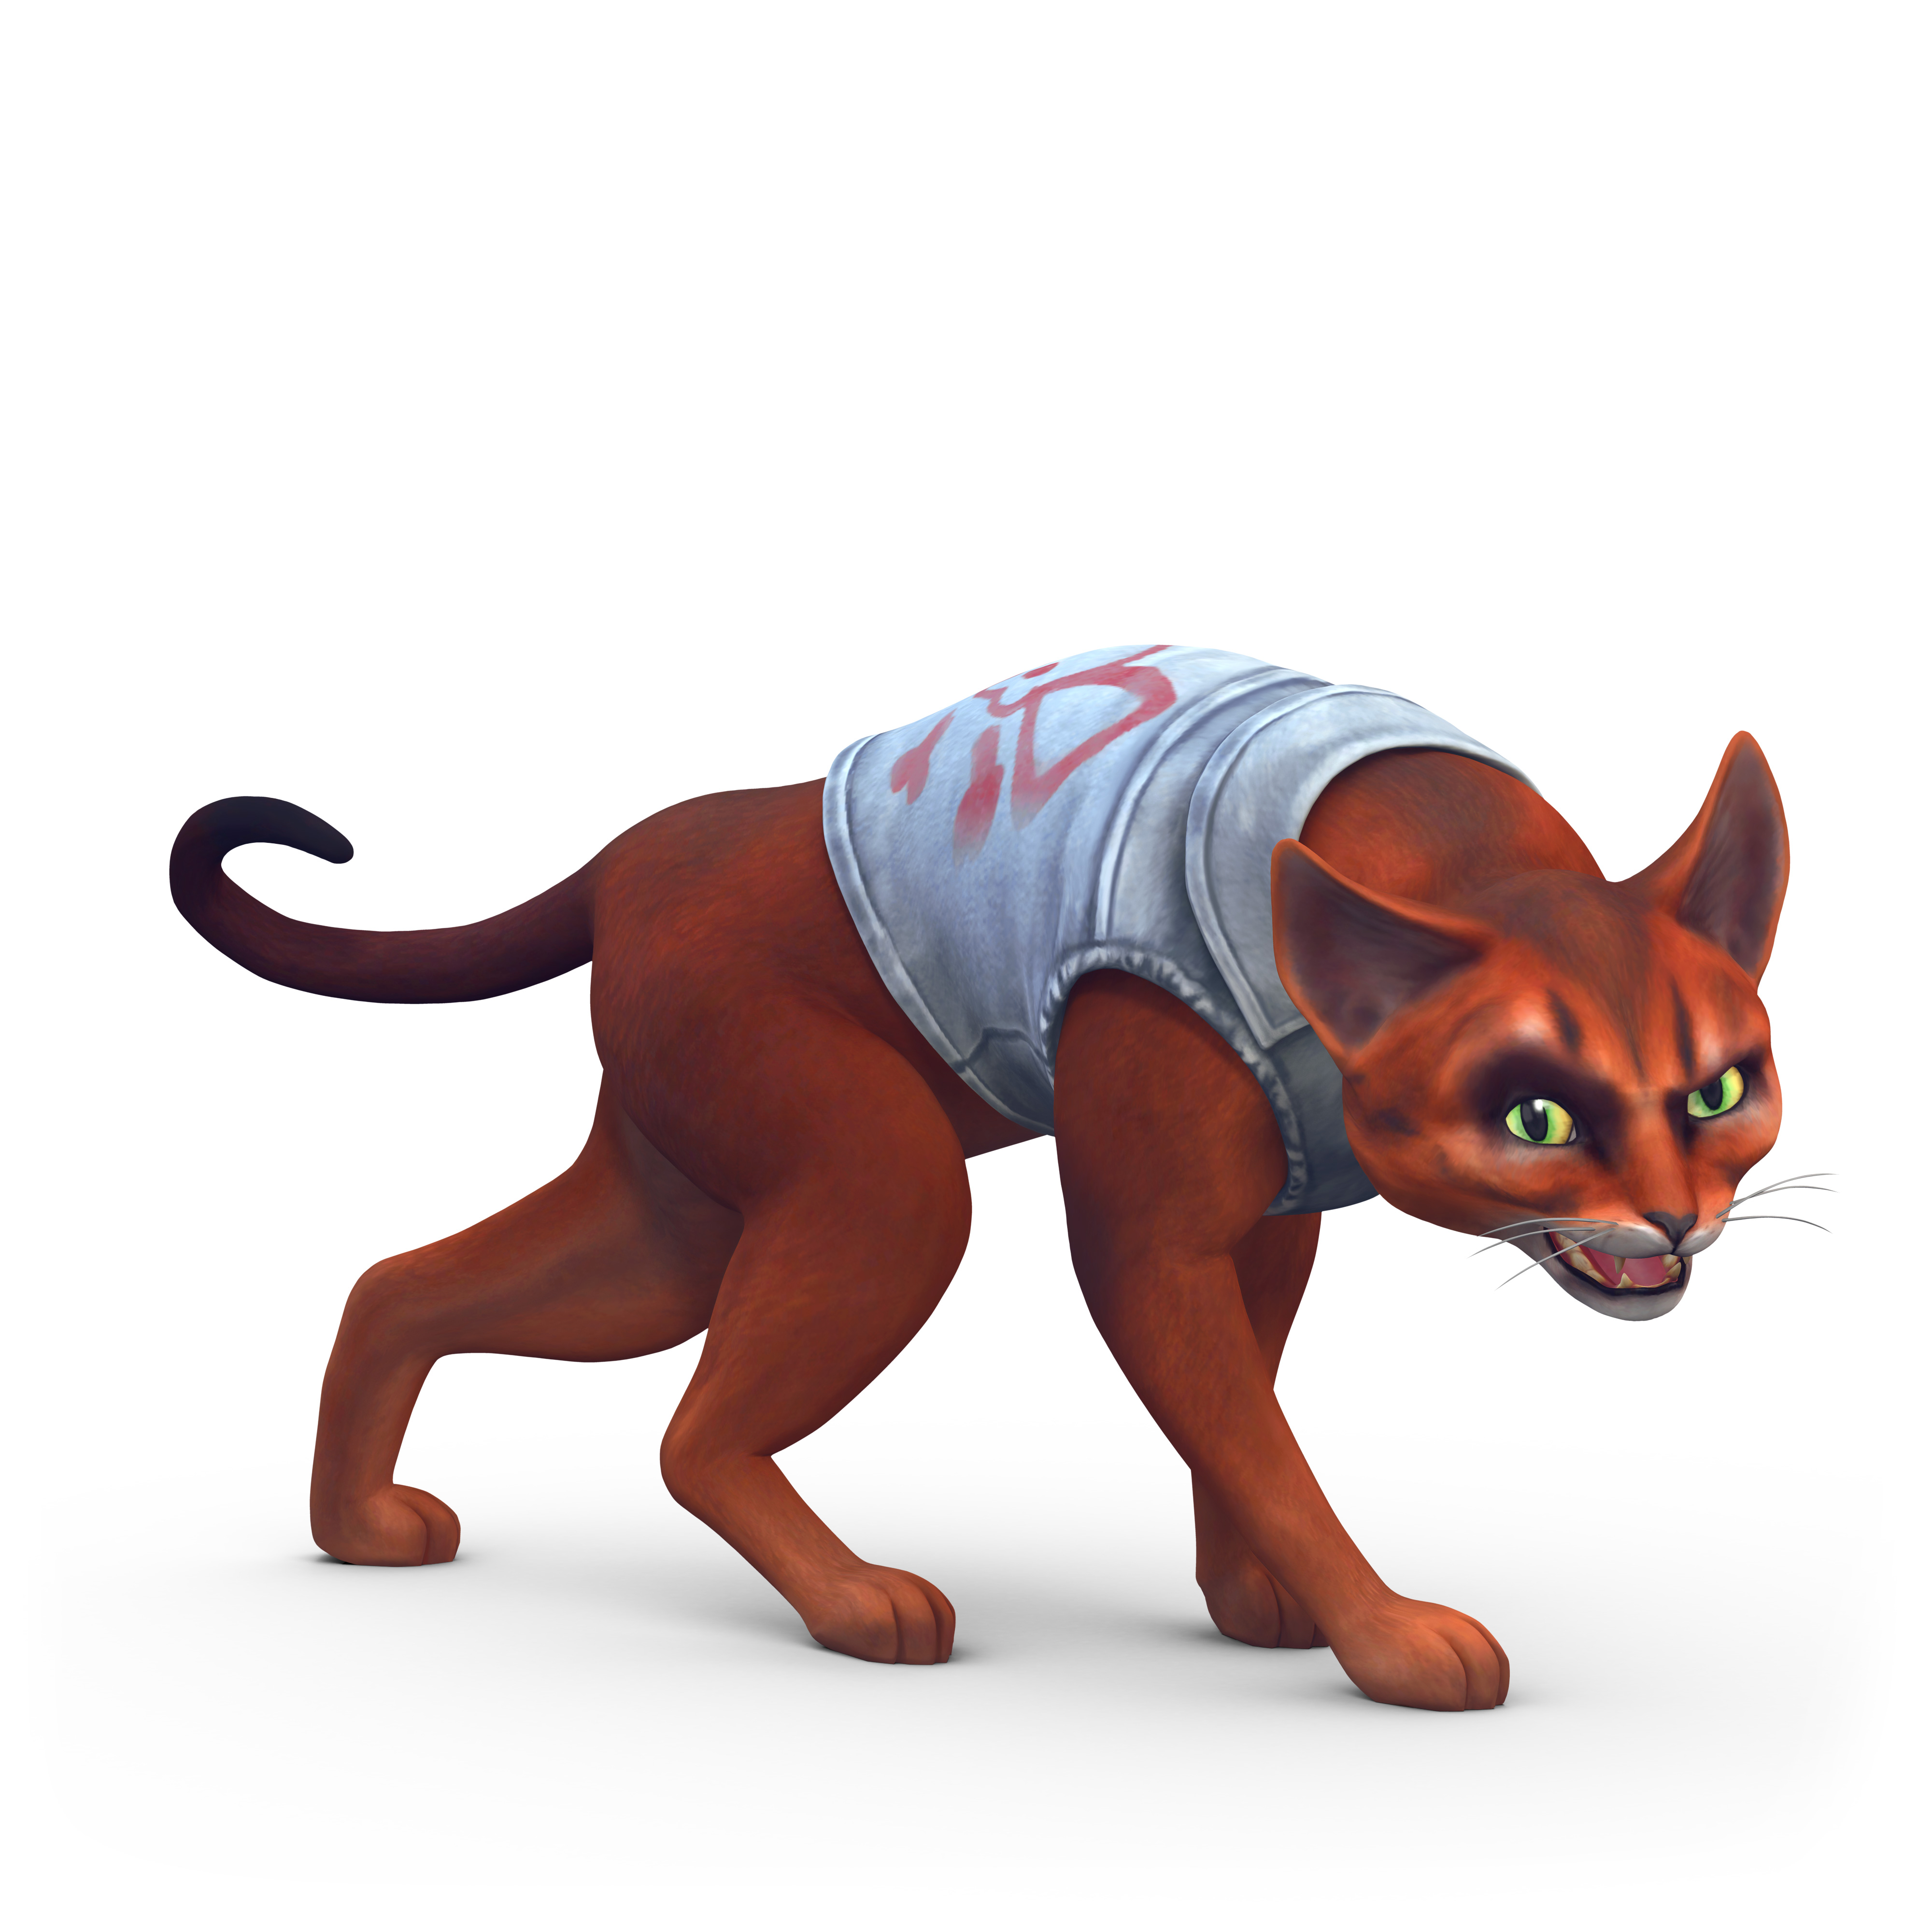 sims 4 cats amd dogs free